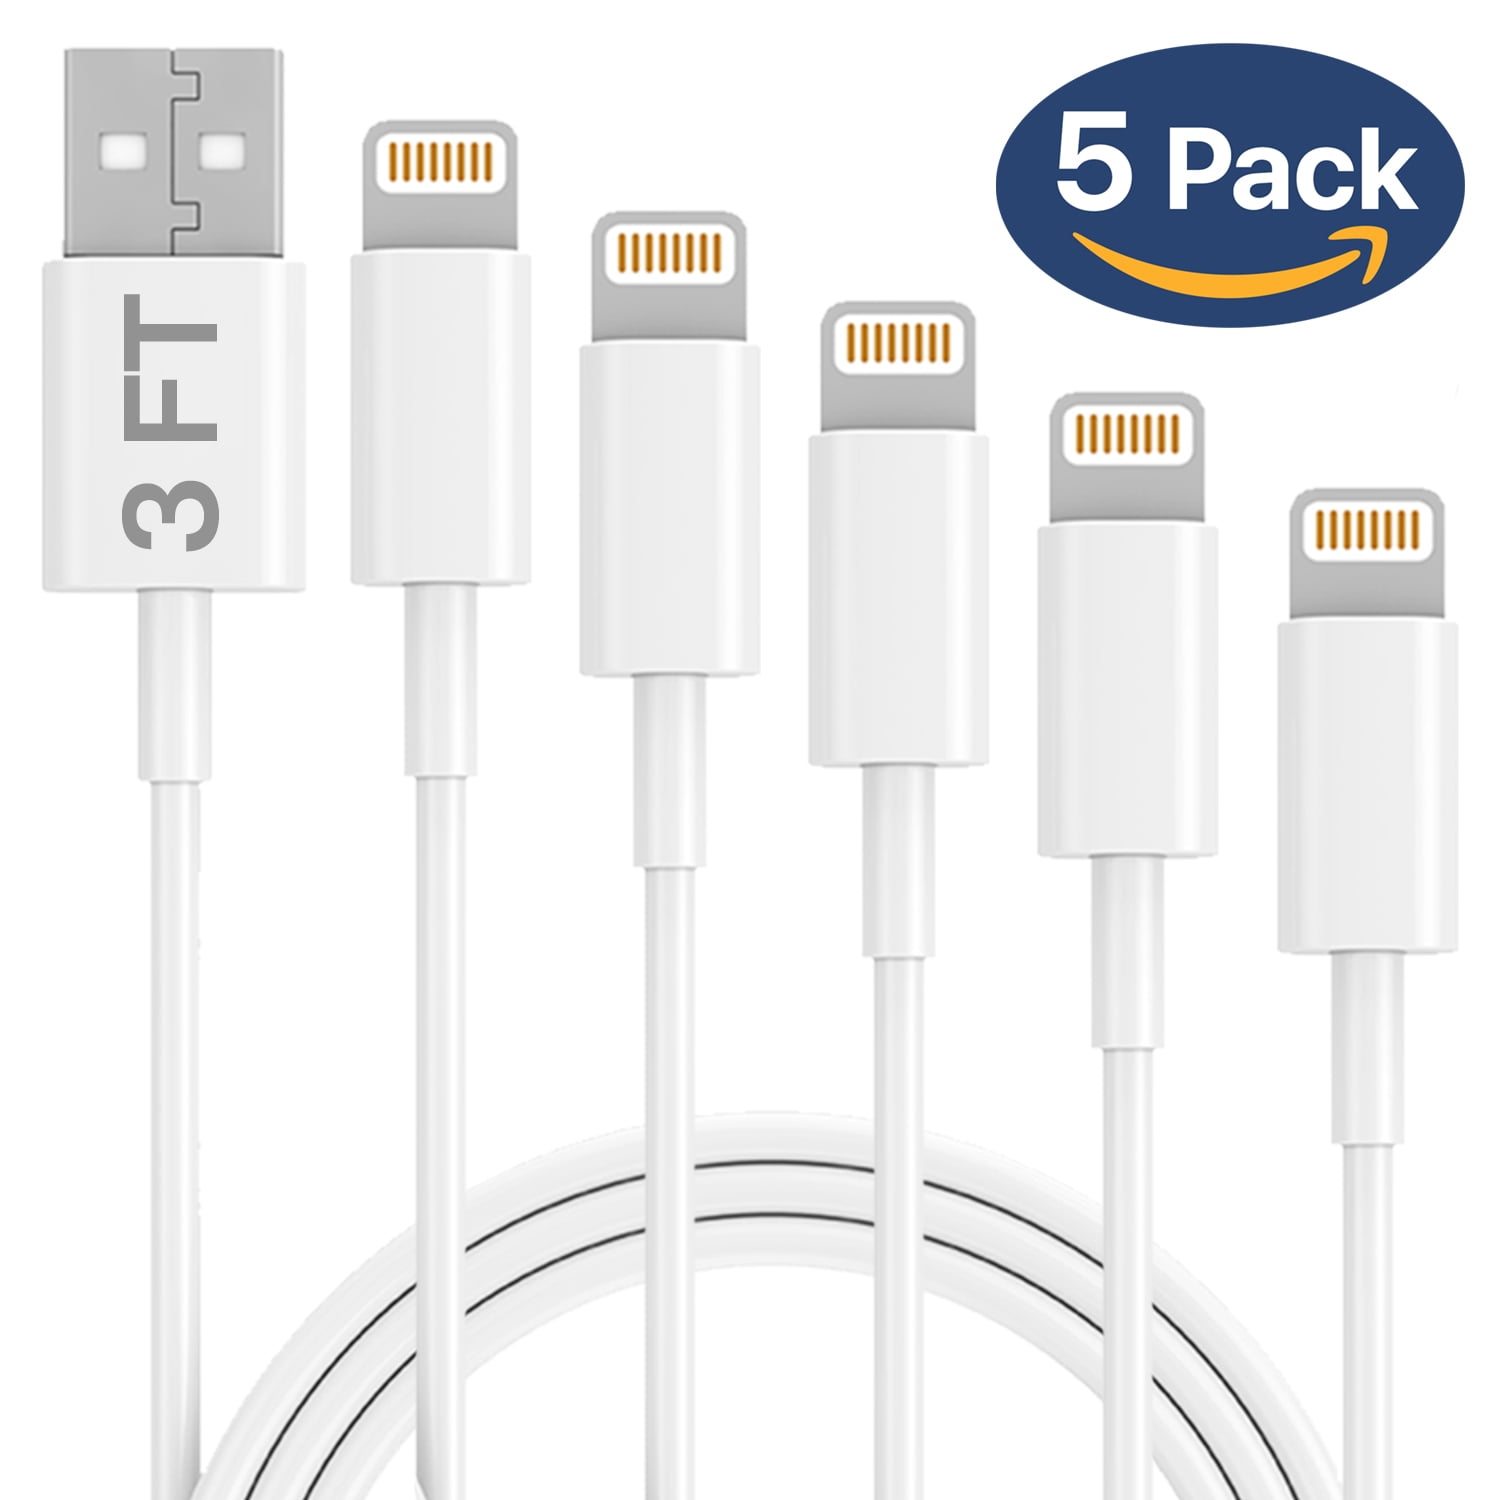 Ixir iPhone Charger Lightning Cable, 5 Pack 3FT USB Cable, For iPhone Xs, Xs Max, XR, X, 8 Plus, Plus, 6S, 6S Plus,iPad Air, Mini, iPod Touch, Case,